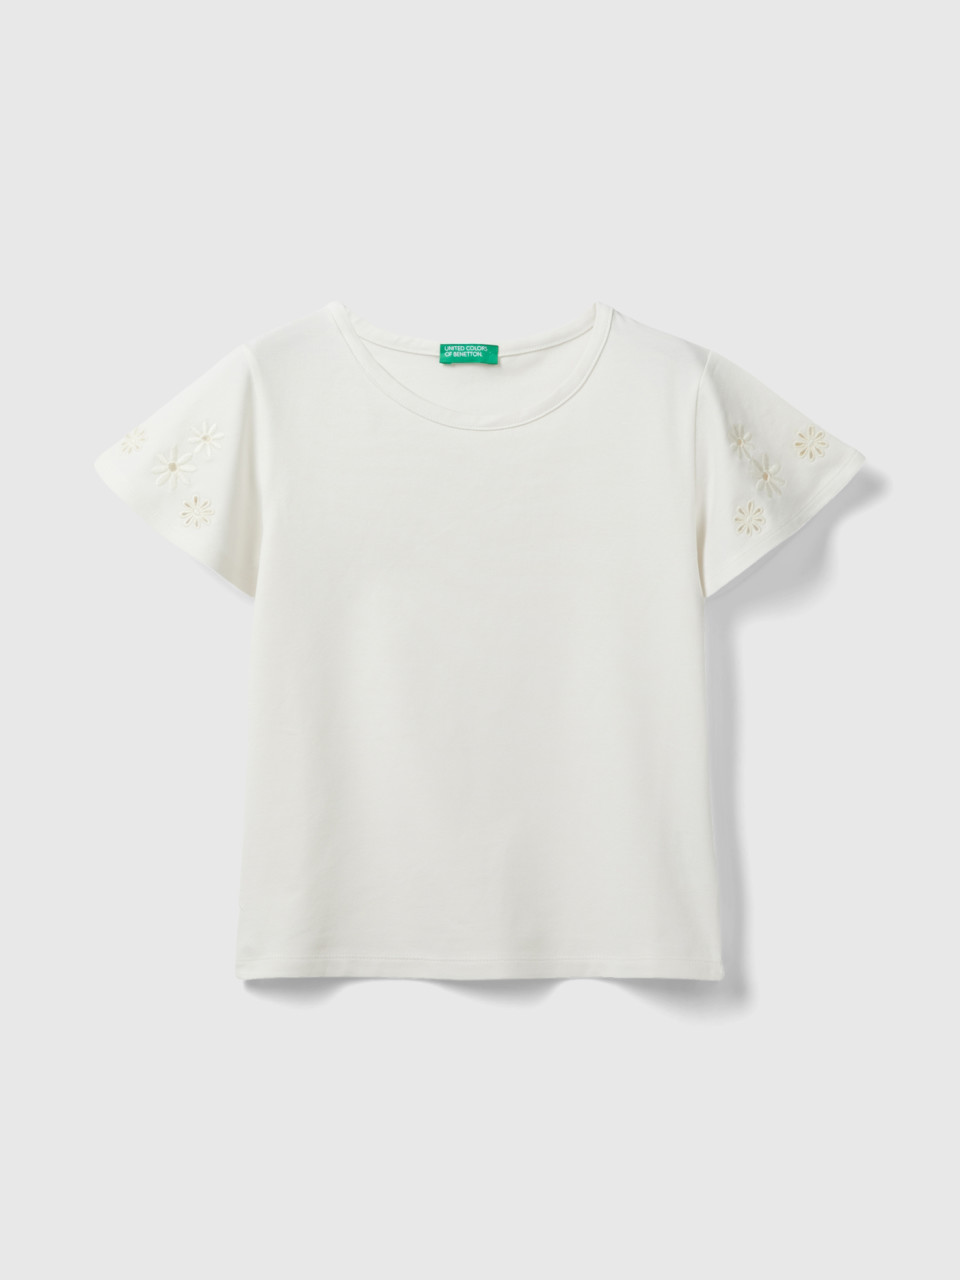 Benetton, T-shirt With Floral Embroidery, Creamy White, Kids